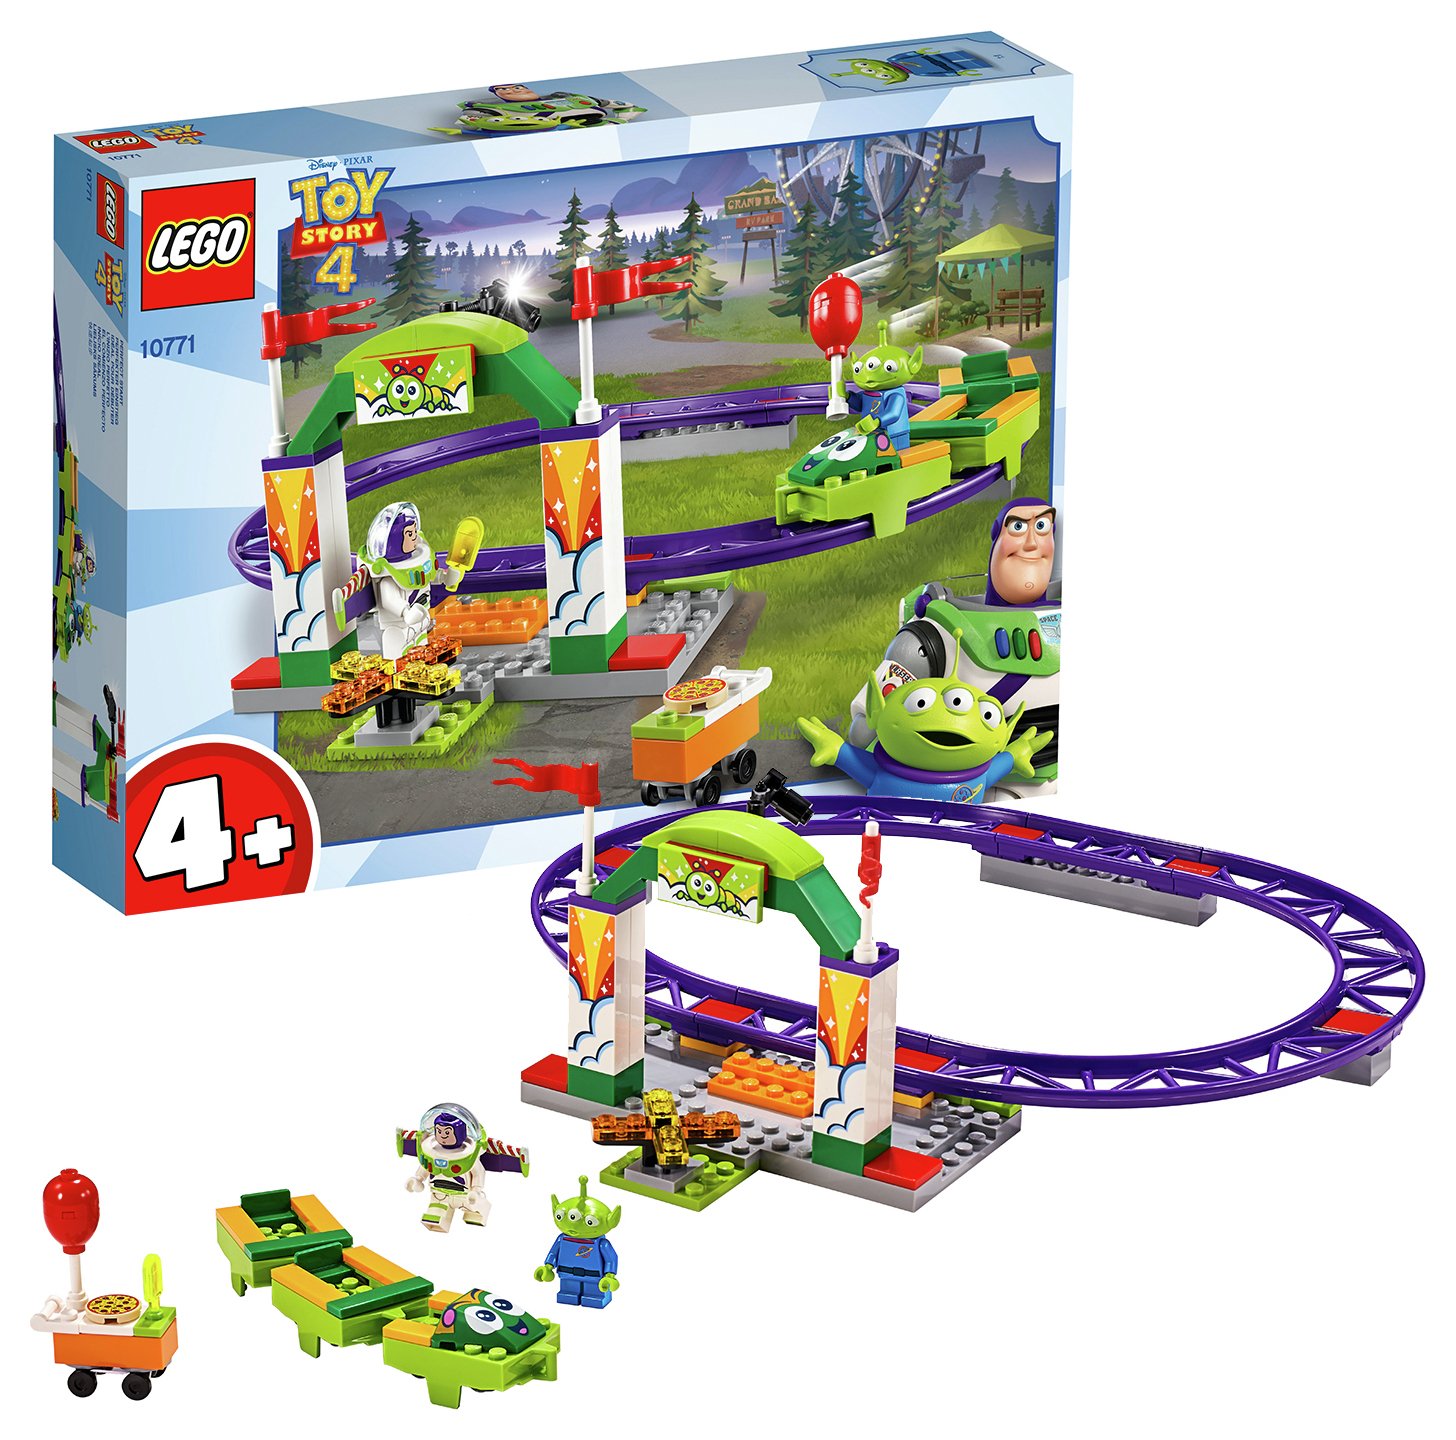 LEGO Toy Story 4 Rollercoaster Playset - 10771